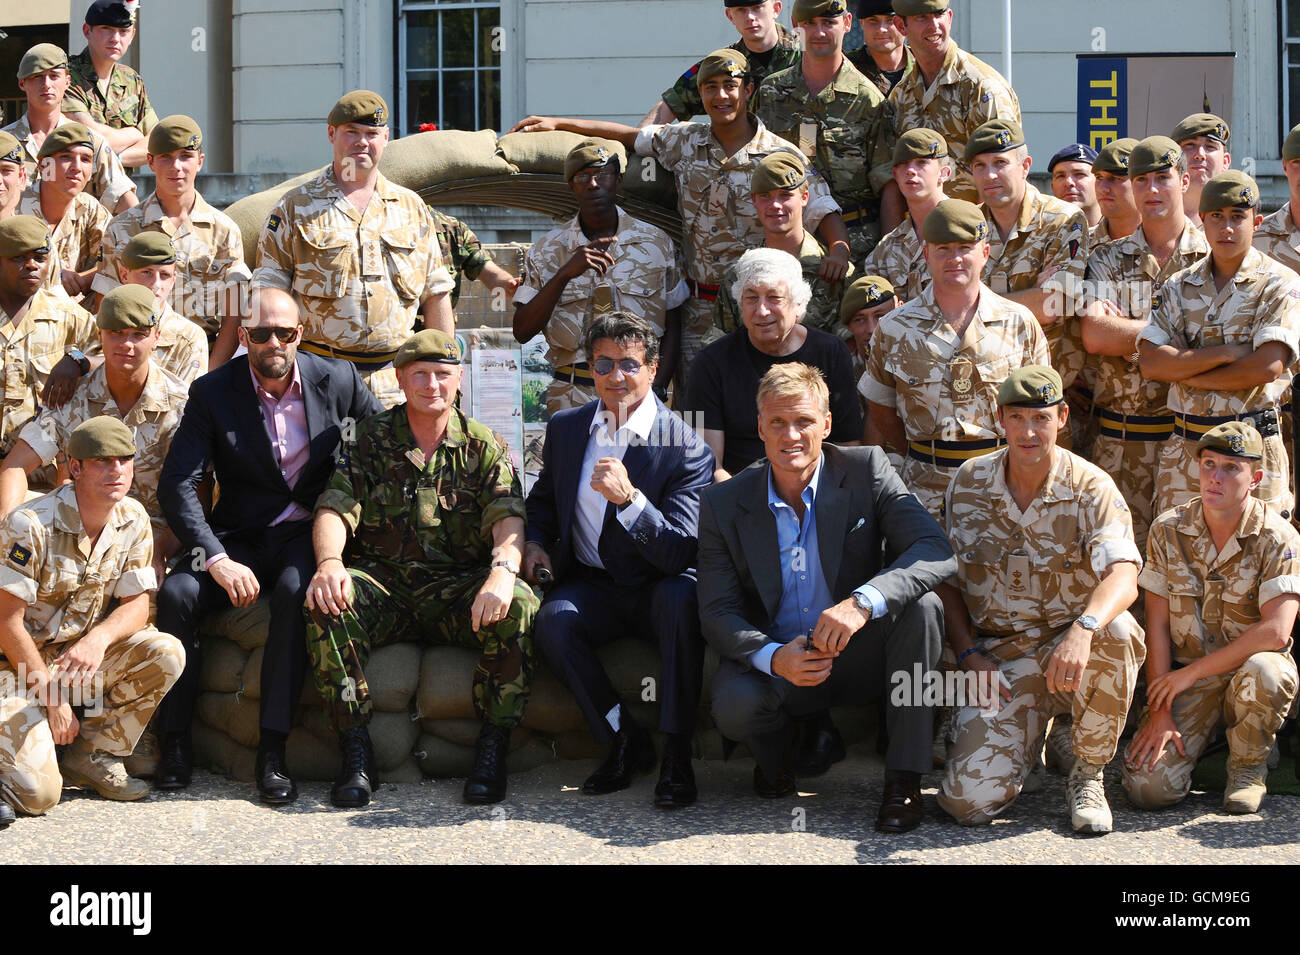 Jason Statham, Sylvester Stallone and Dolph Lundgren meet troops from the Princess of Wales Royal Regiment, at the Wellington Barracks in London before tonight's premiere of The Expendables. Stock Photo